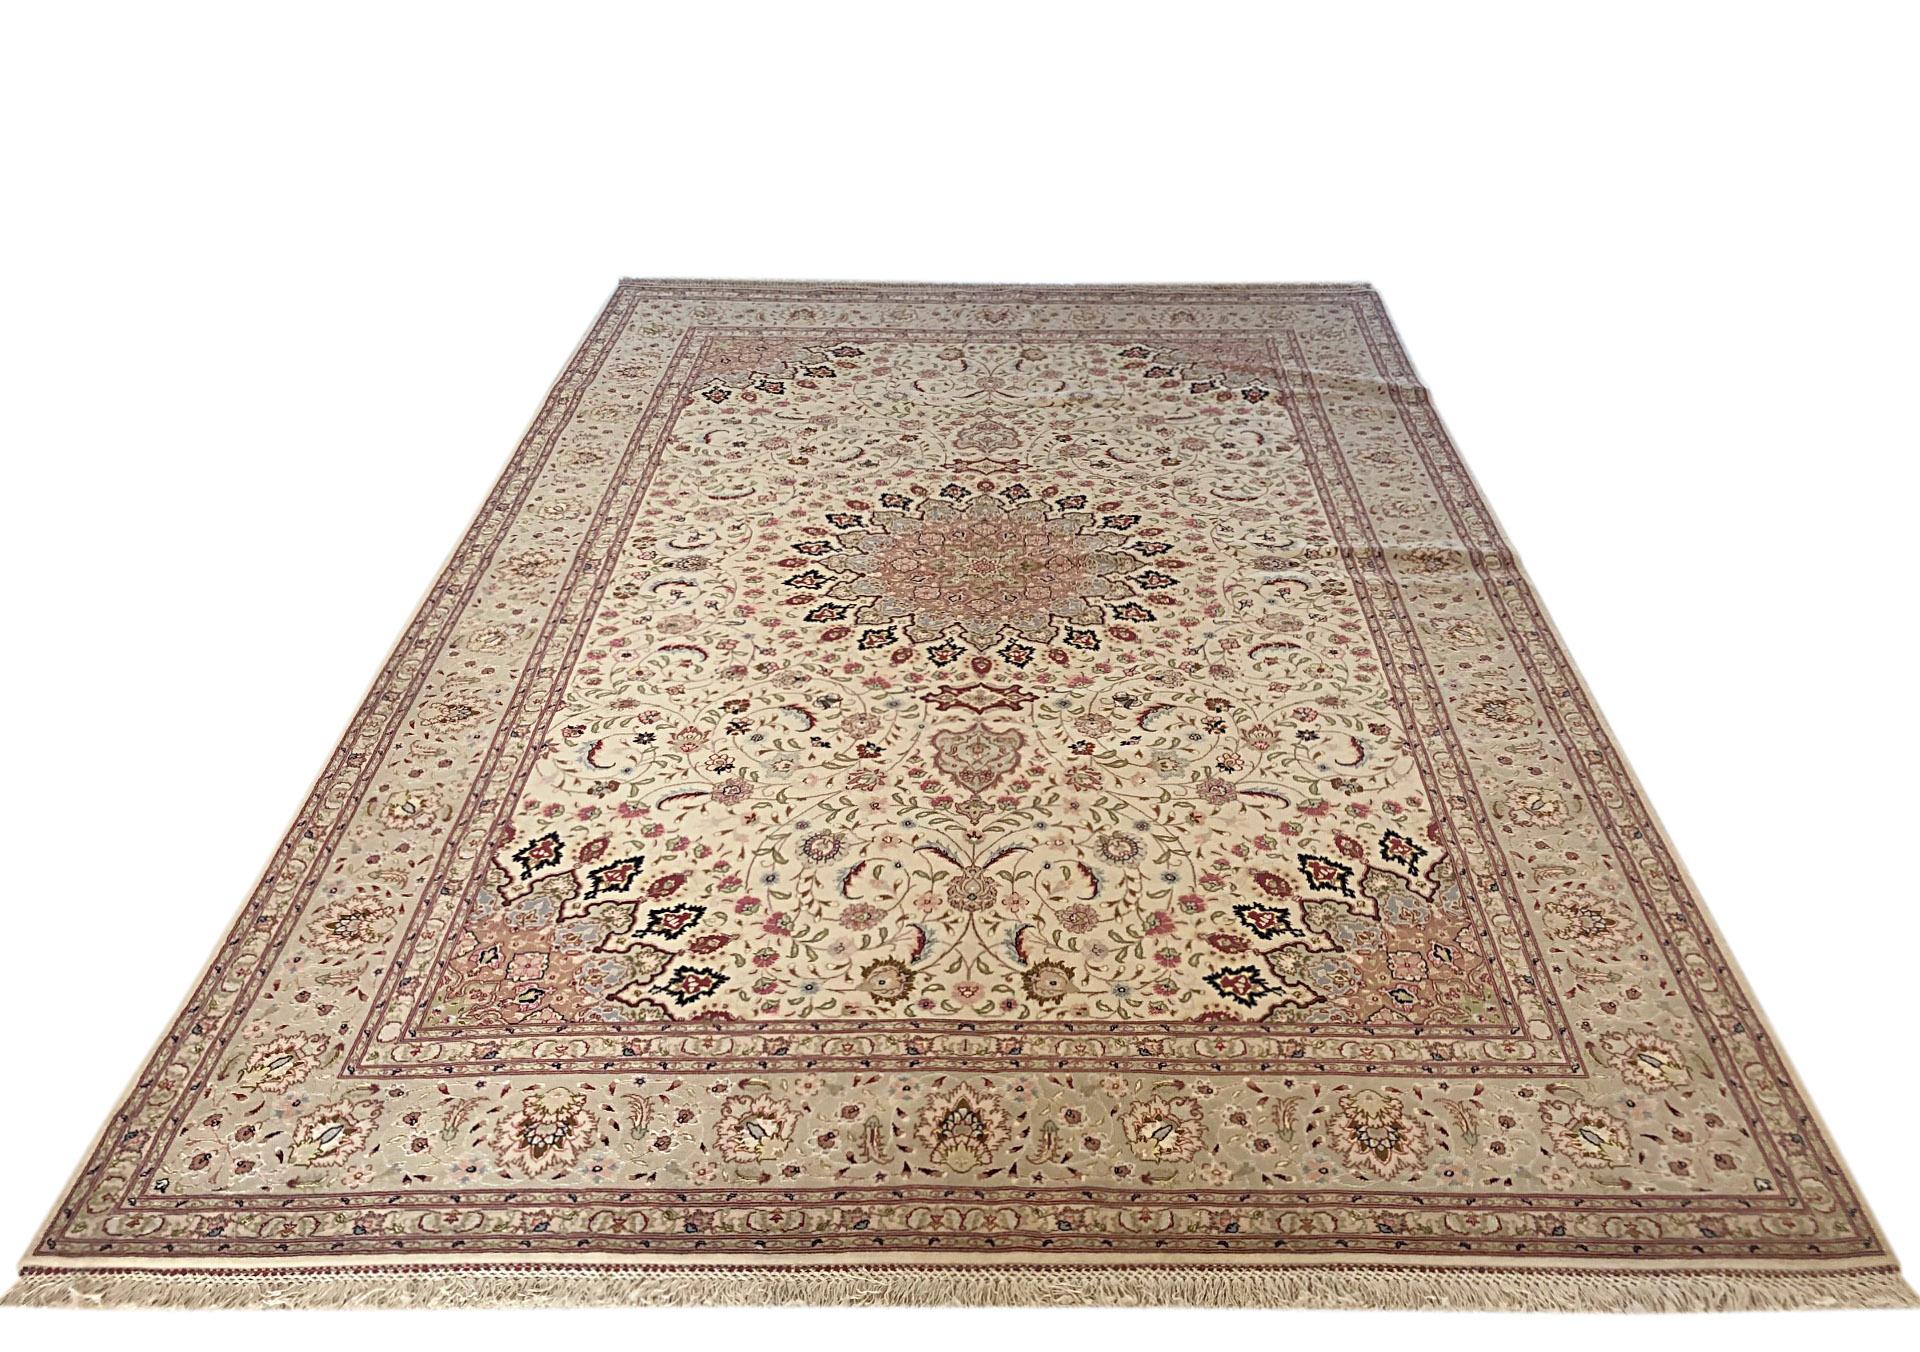 This is a hand knotted Persian Tabriz rug with a floral medallion design (Shahsavarpour Design). The pile is wool and silk with silk foundation. The size is 6 feet 6 inches wide by feet 9 feet 11 inches tall. This rug is a brand new rug. The design